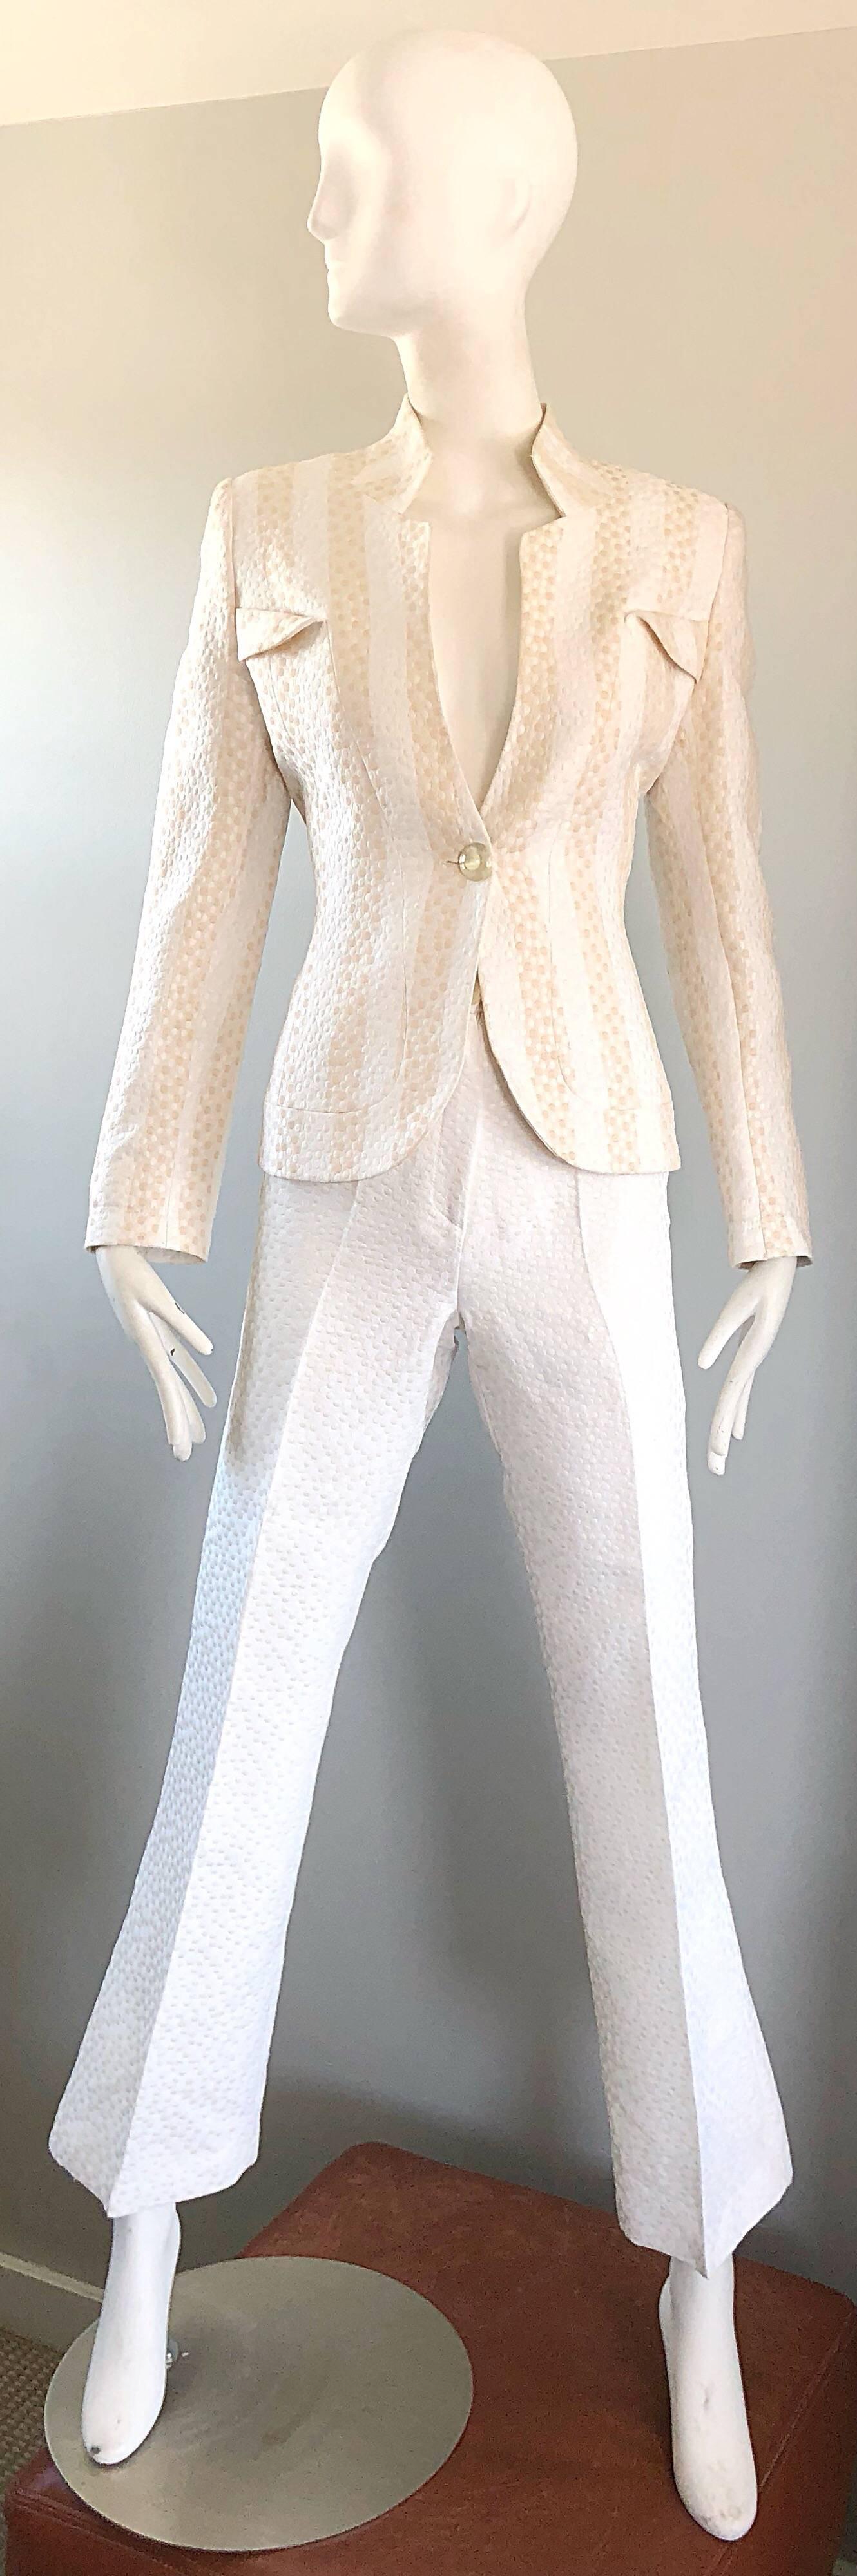 Vintage Max Nugus Couture 1990s White + Beige Polka Dot 90s Tailored Pant Suit 8